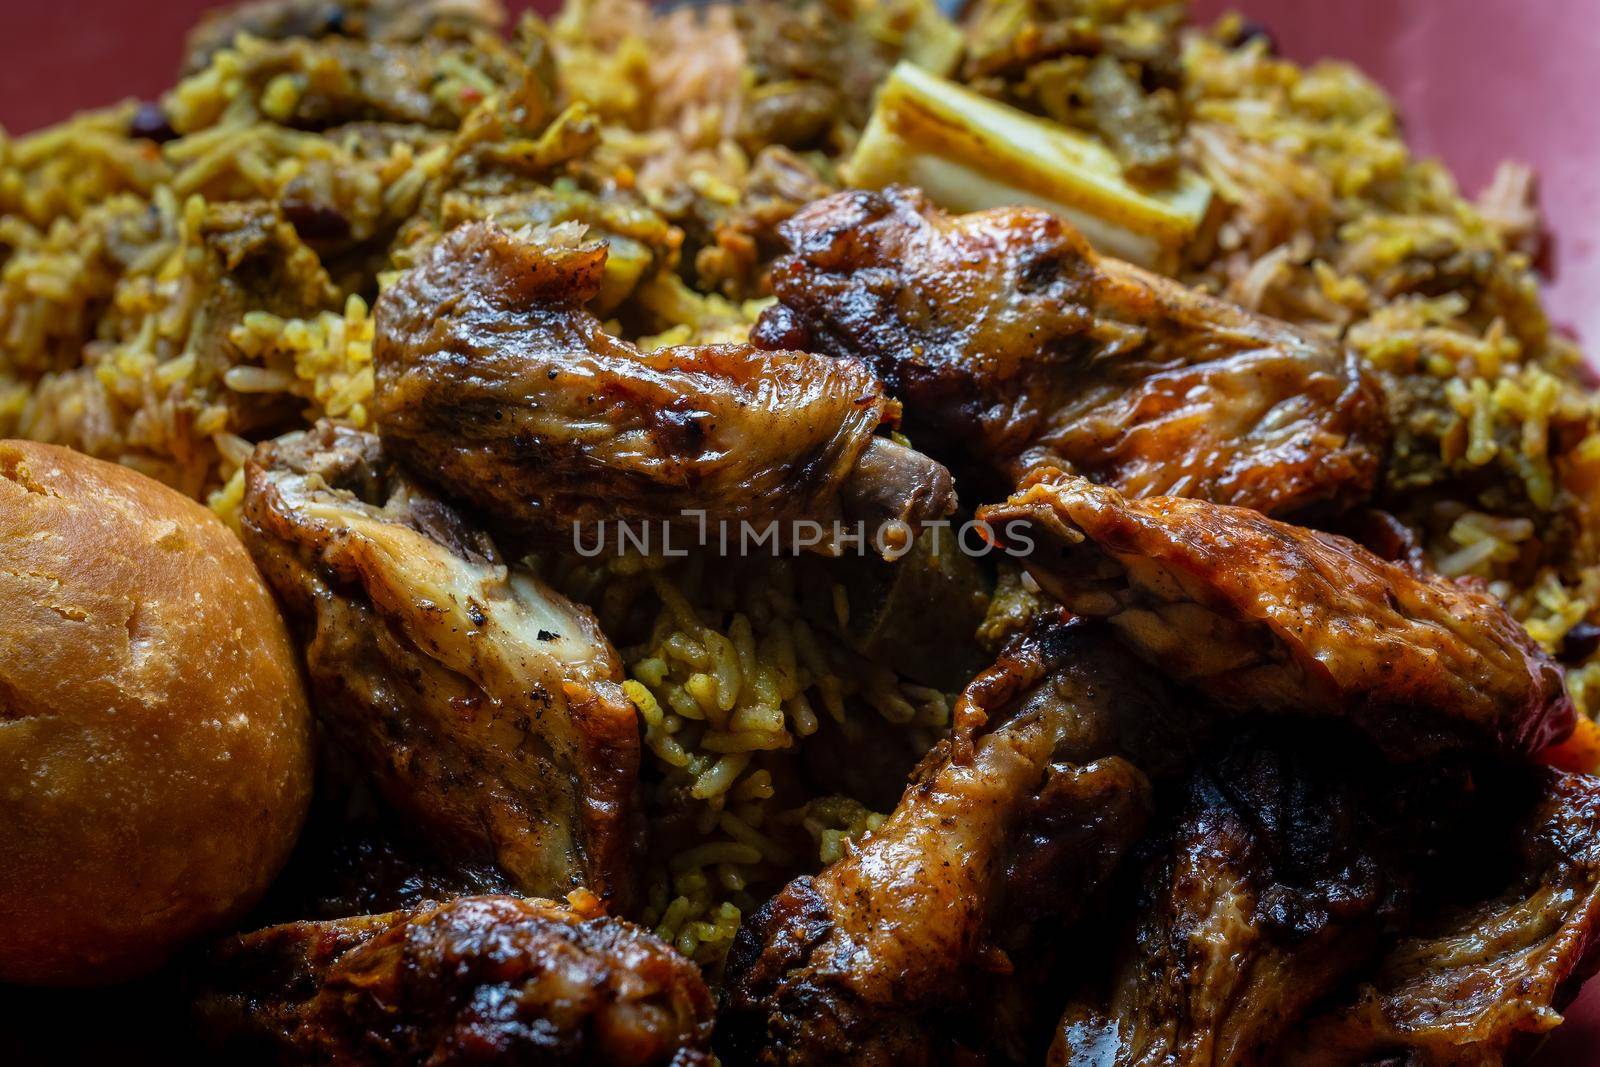 Jamaican jerk chicken wings, curried goat and fried dumpling with rice and peas by magicbones